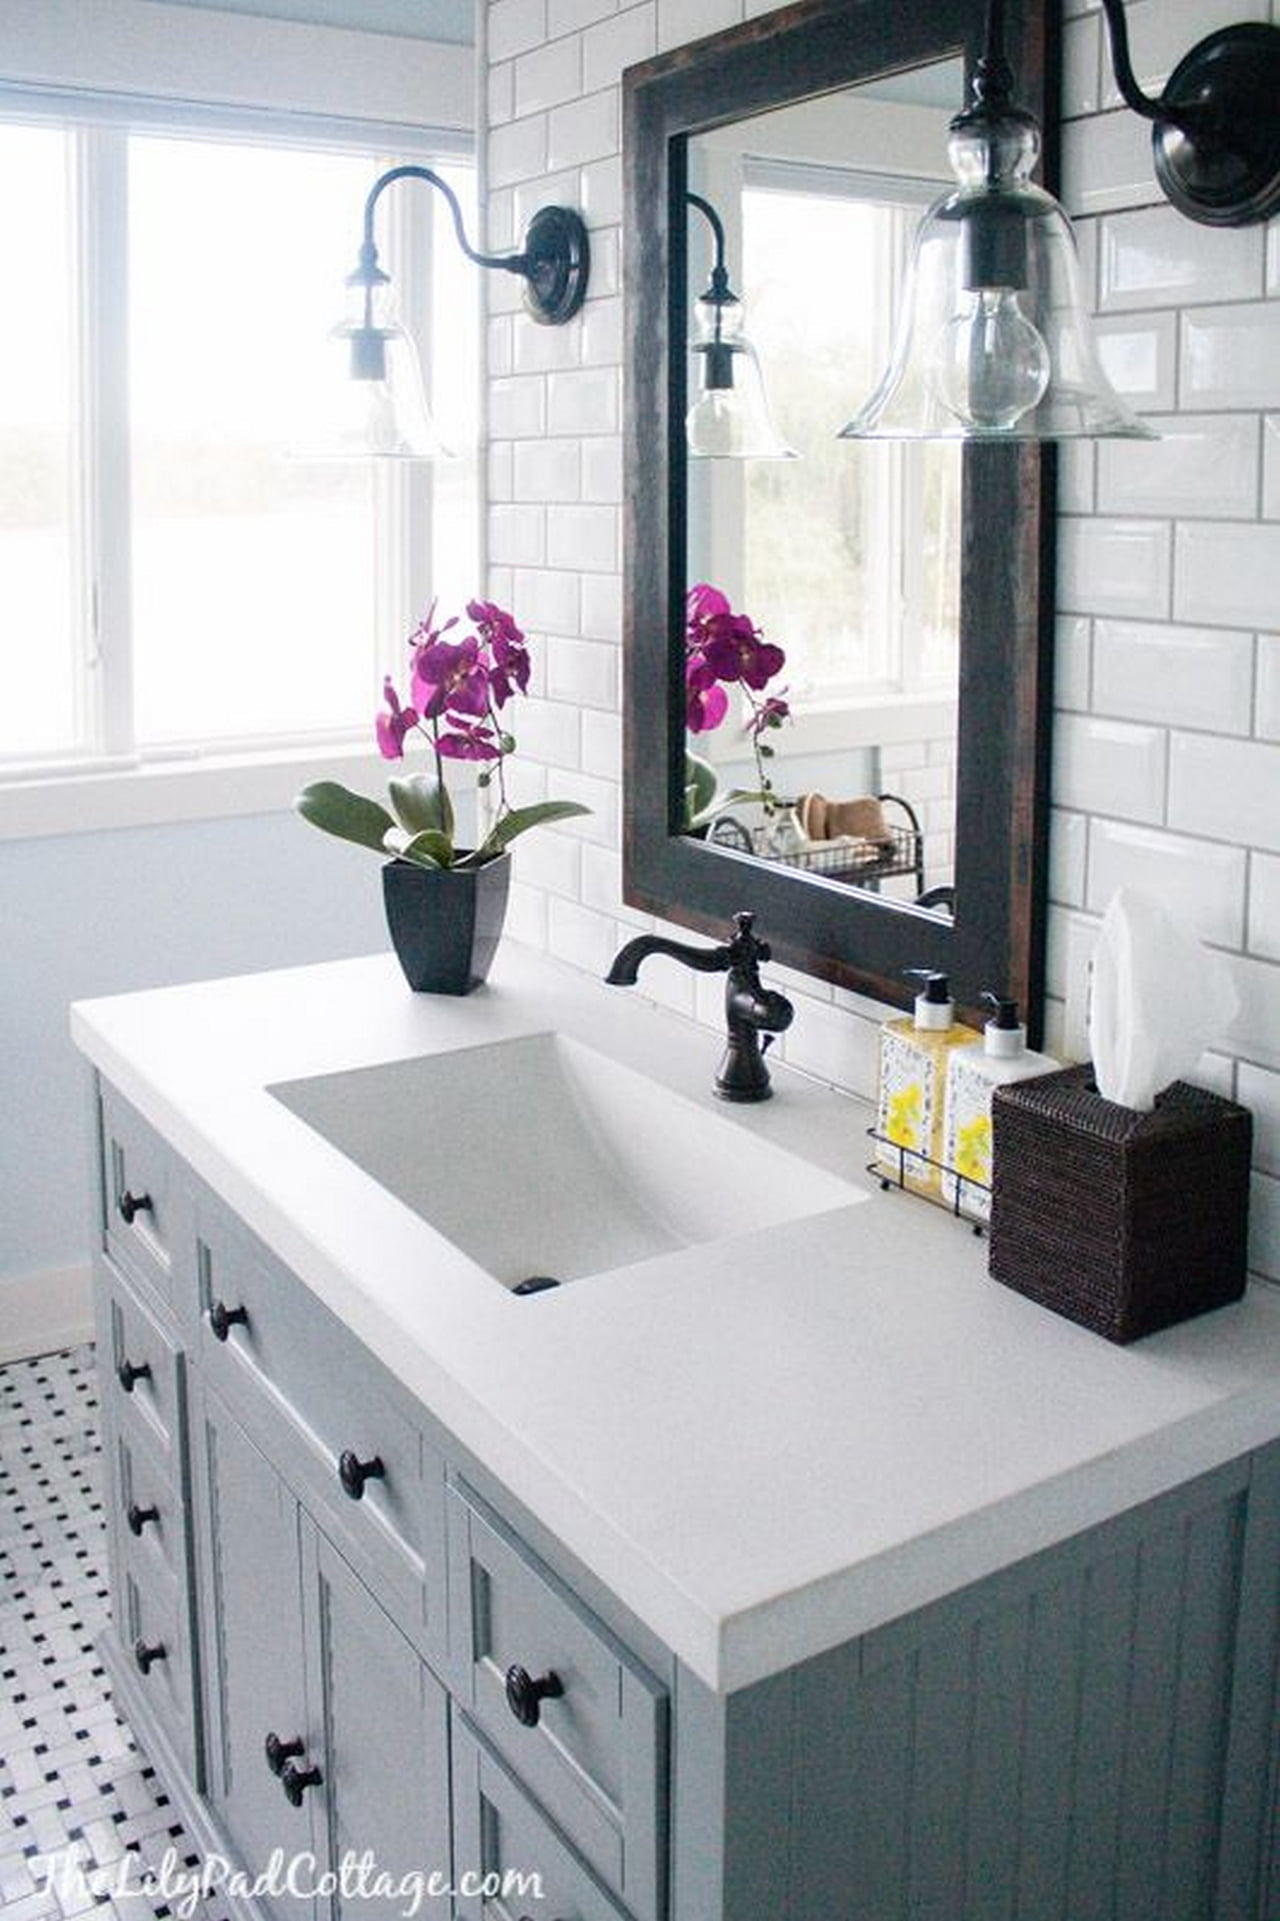 25 Best Bathroom Decor Ideas And Designs That Are Trendy In 2020,Stuffed Peppers